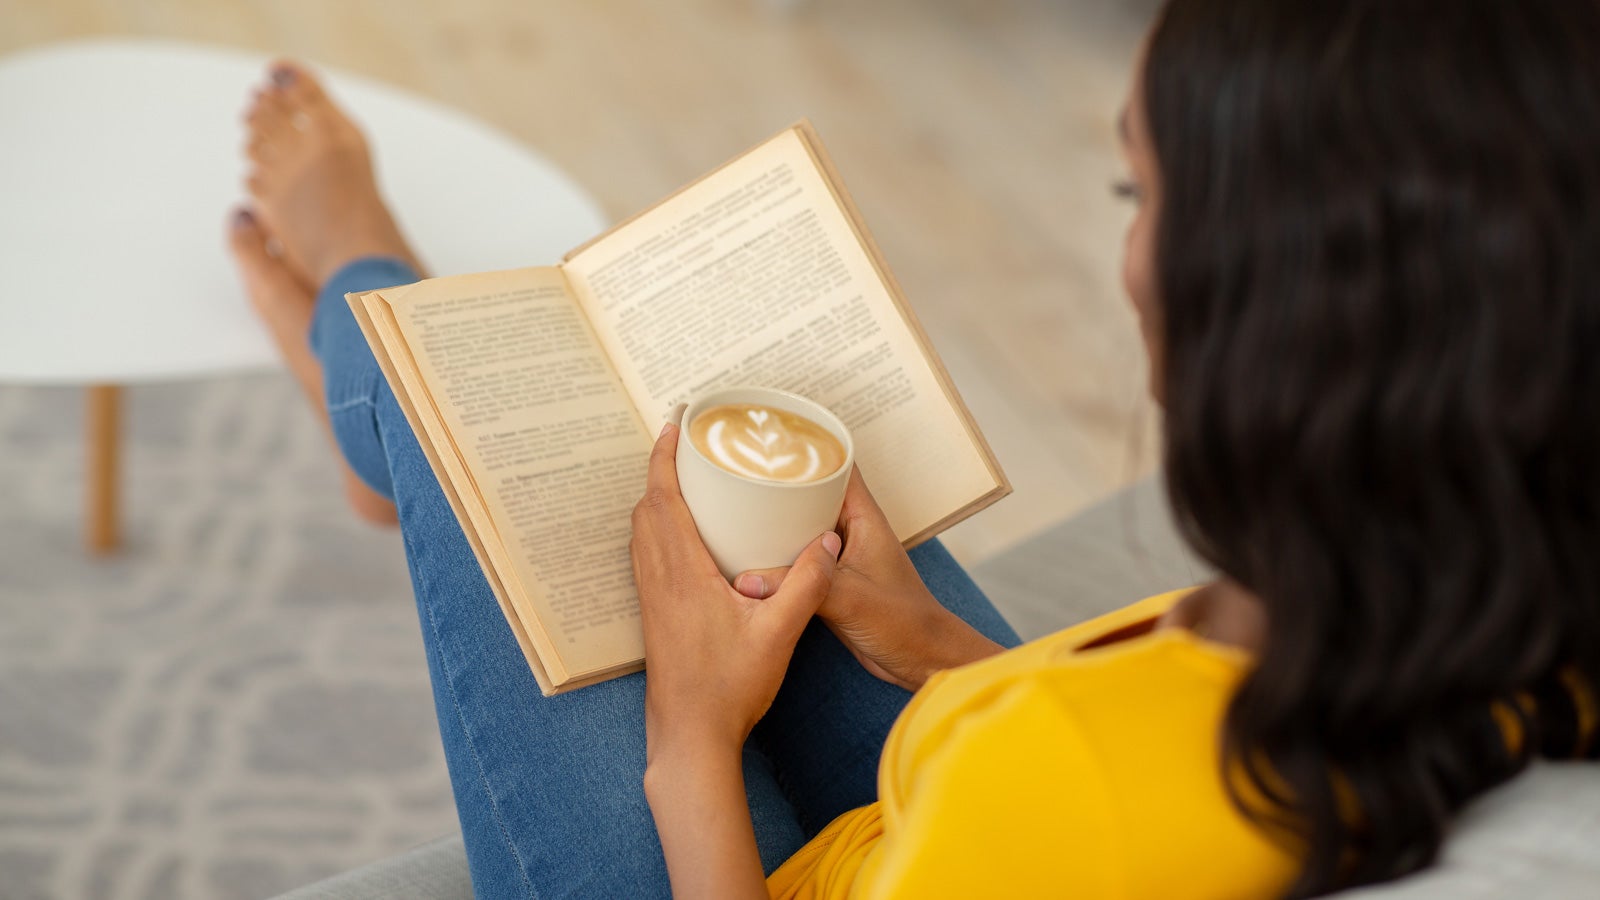 Woman reads with her feet up on a coffee table holding a coffee